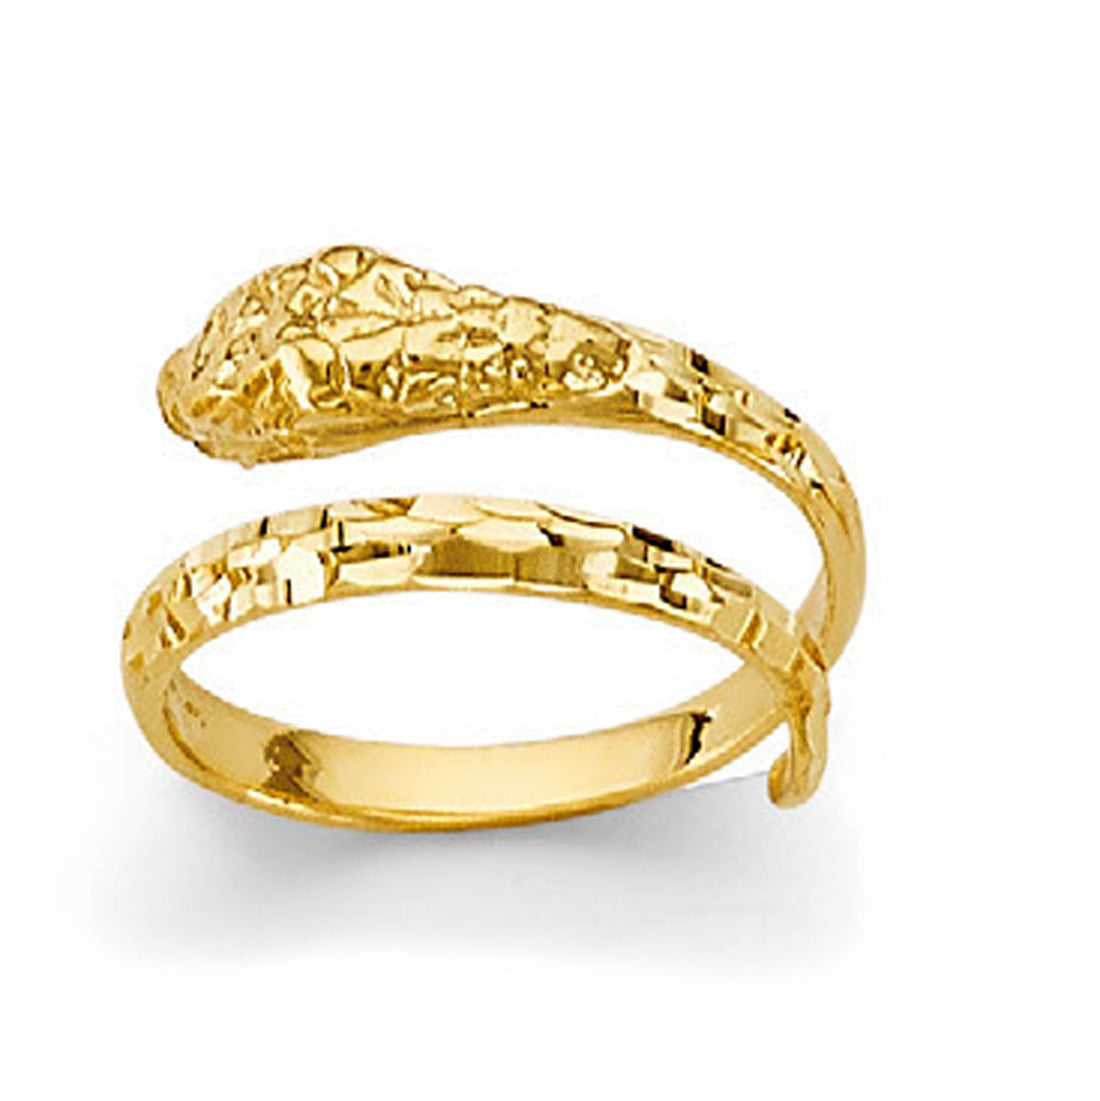 Wrapped Snake Ring in Solid Gold 